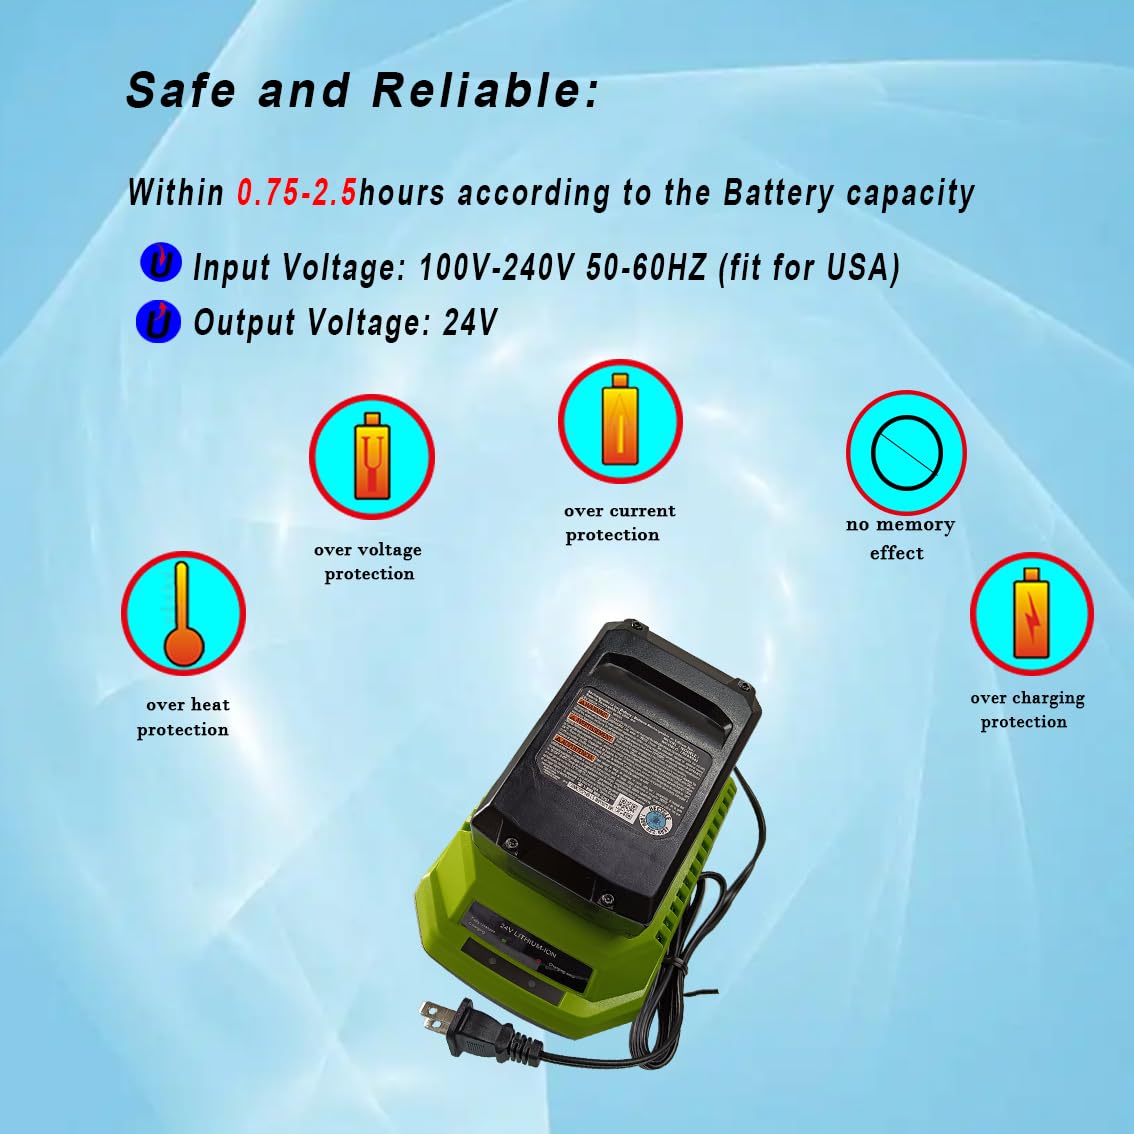 ANOPIW 29862 Replace Greenworks 24v Battery Charger to Charge 24v Lithium Battery 29842 29852 BAG708 BAG711 Battery and Tools 20352 22232 2508302